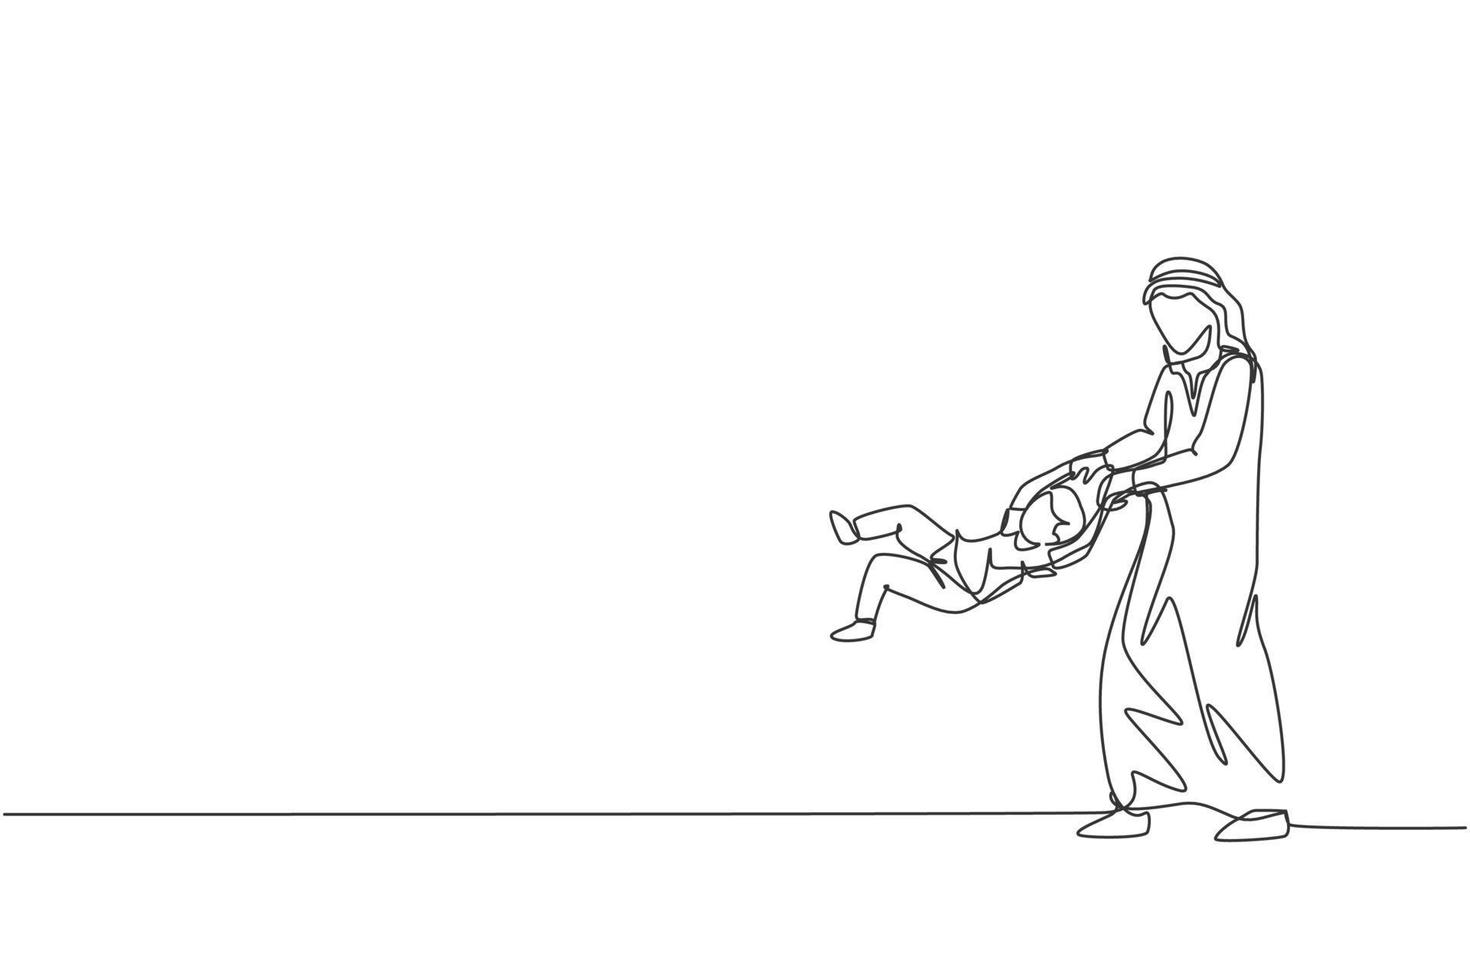 One single line drawing of young Arabian father play and lift his boy son up into the air at home vector illustration. Happy Islamic muslim family parenting concept. Modern continuous line draw design